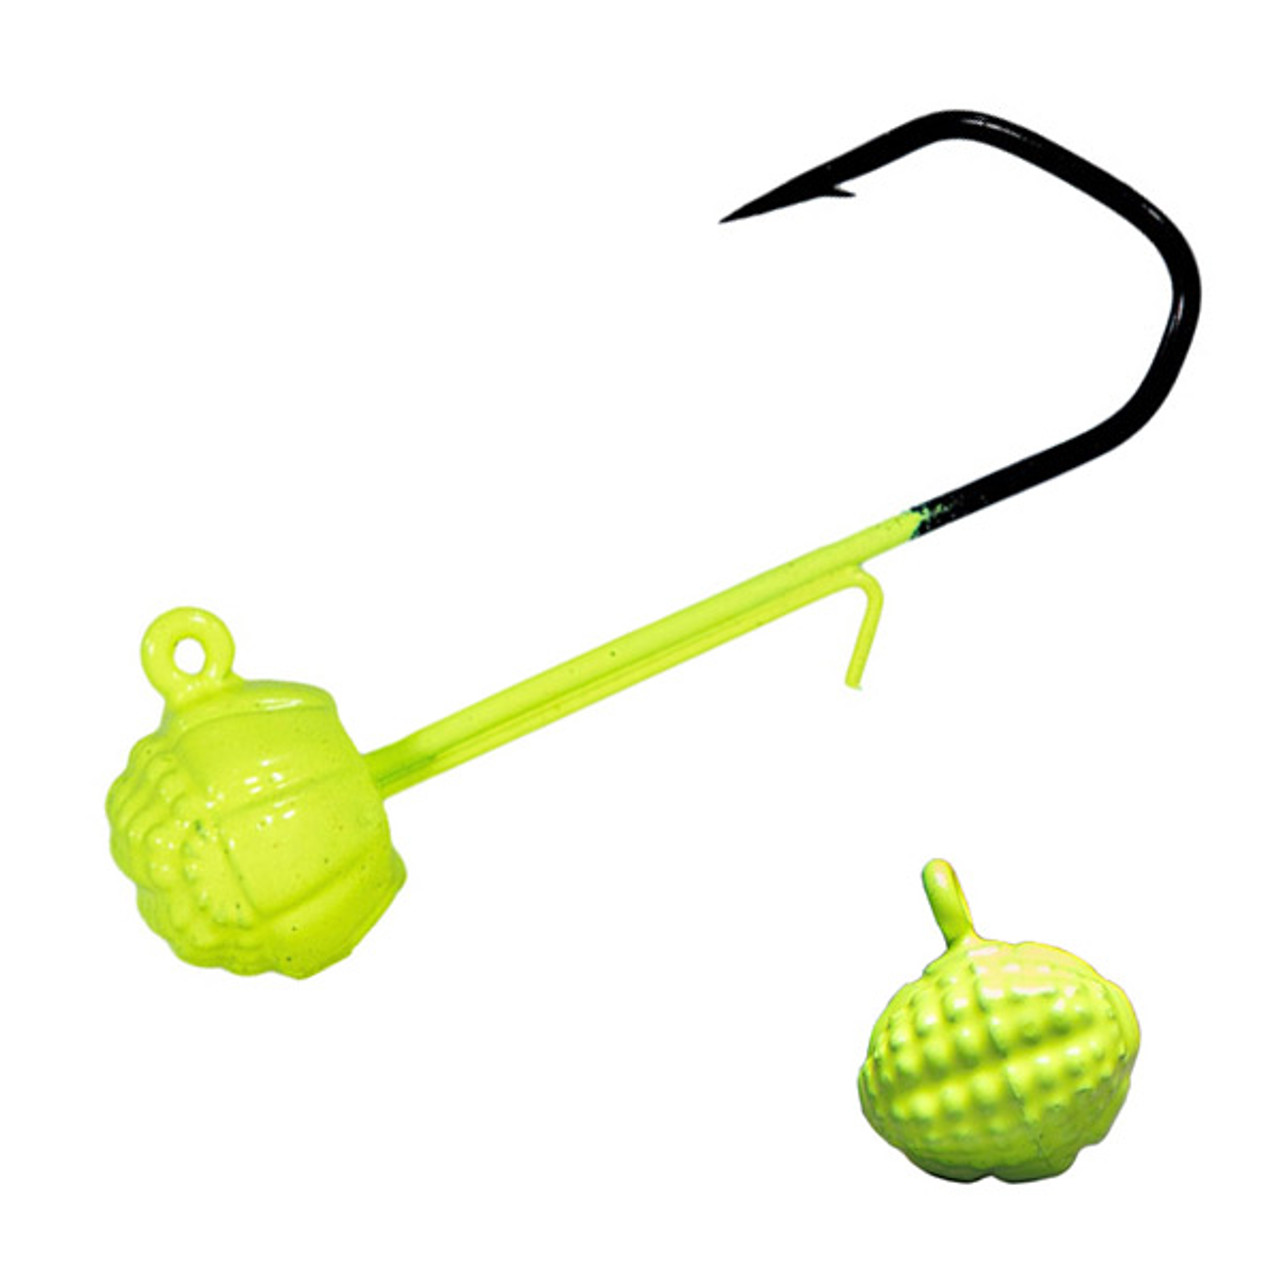 Hail Mary 1/8 oz Ned Jig Heads by All-Terrain Tackle